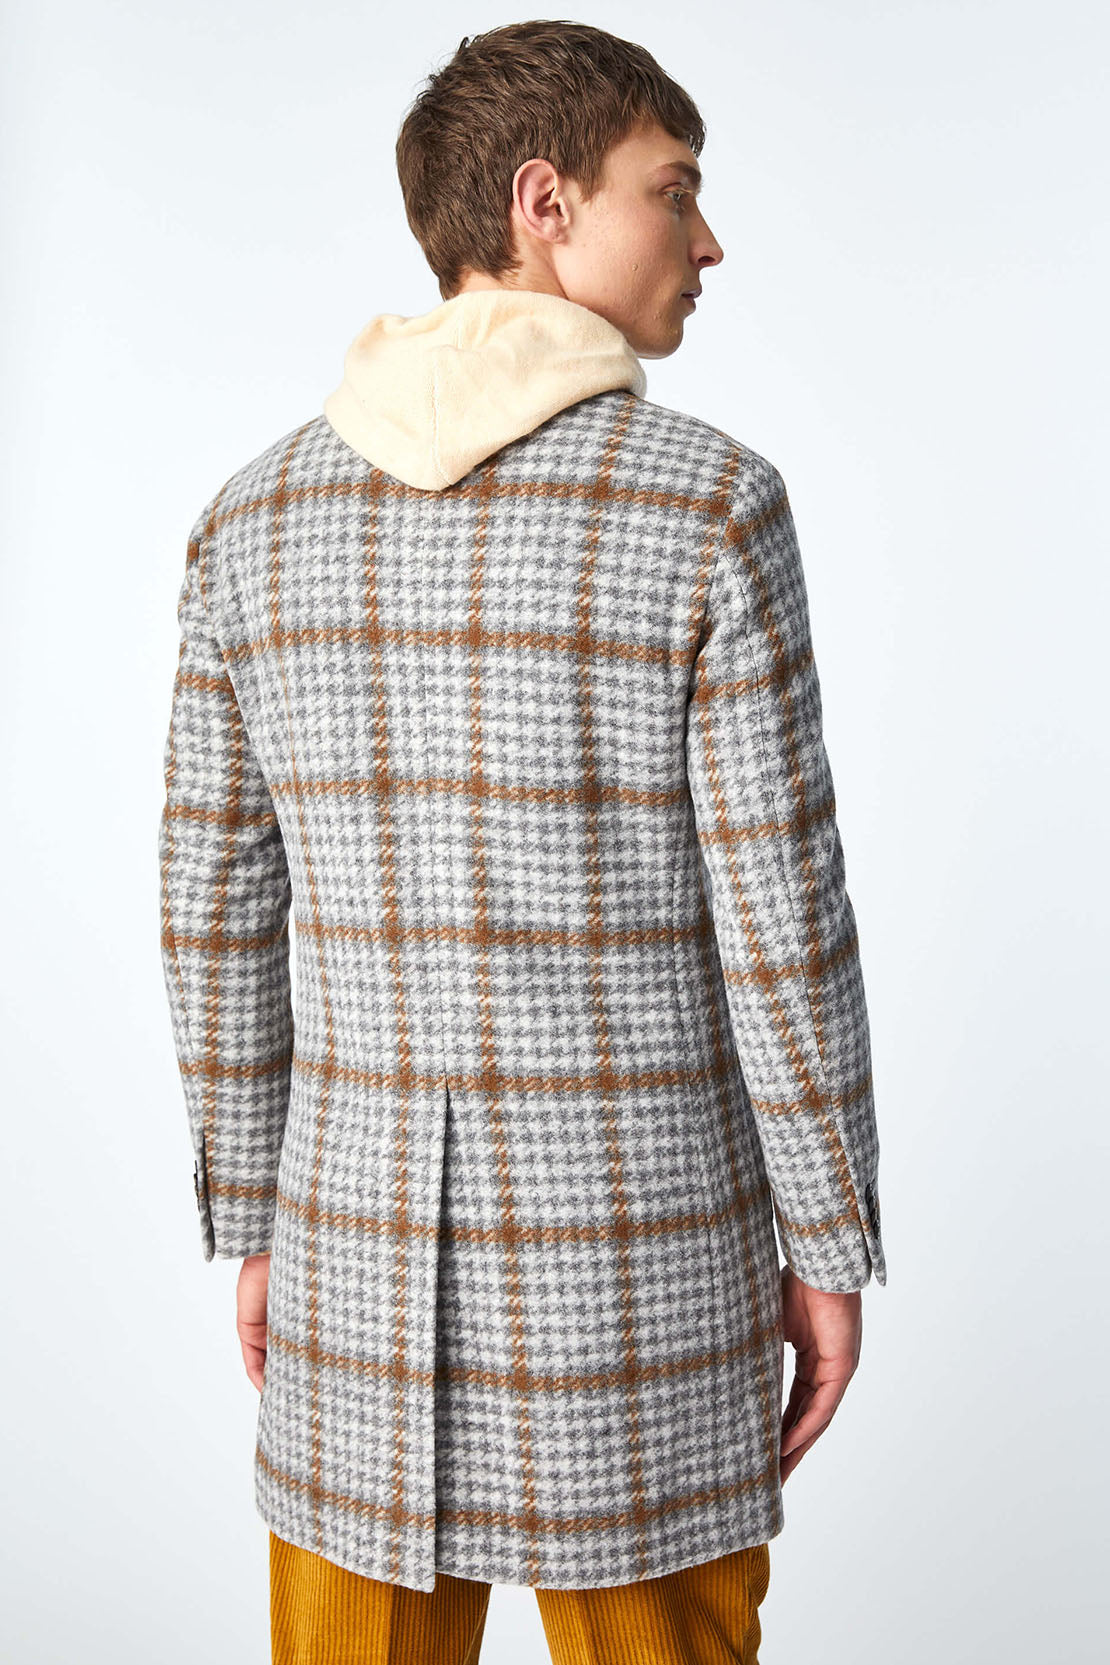 L.B.M 1911 - LONDON Soft Wool Blend Overcoat In Grey And Brown Check 35720/1 7451